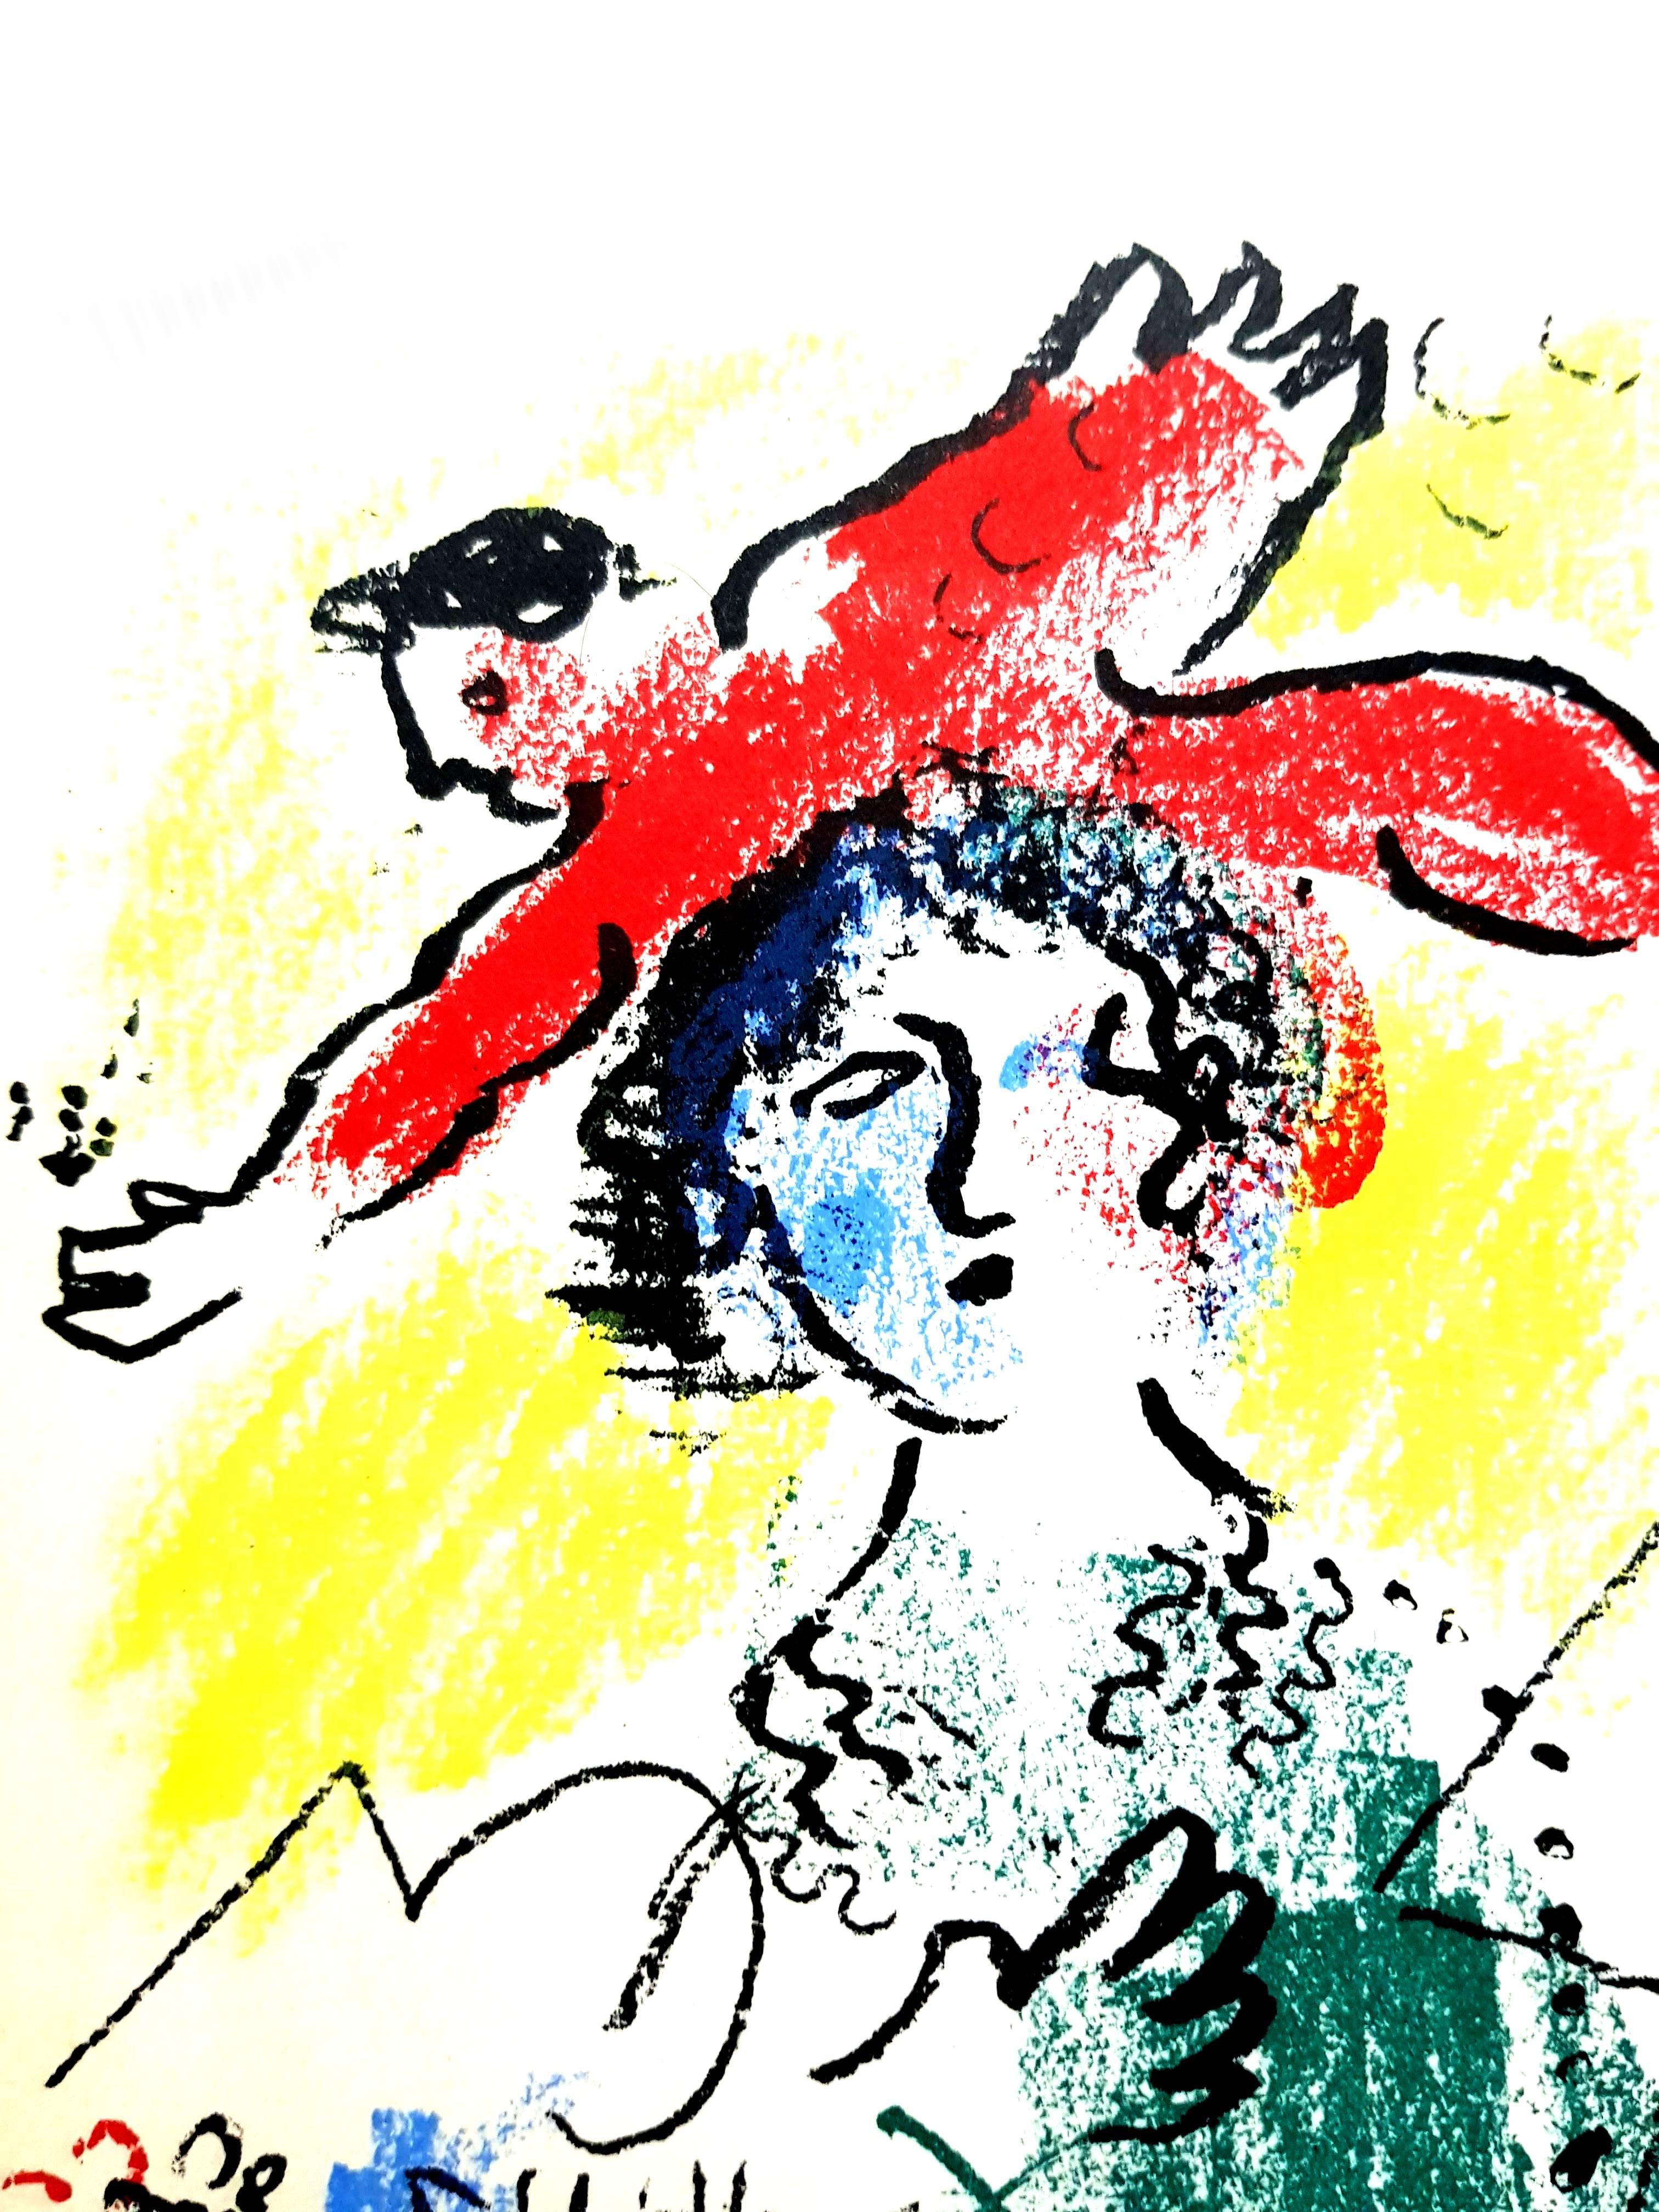 Marc Chagall - Cover - Original Lithograph 
1964
Dimensions: 30 x 20 cm
Edition of 200 (one of the 200 on Vélin de Rives)
Mourlot Press, 1964

Marc Chagall (born in 1887)

Marc Chagall was born in Belarus in 1887 and developed an early interest in